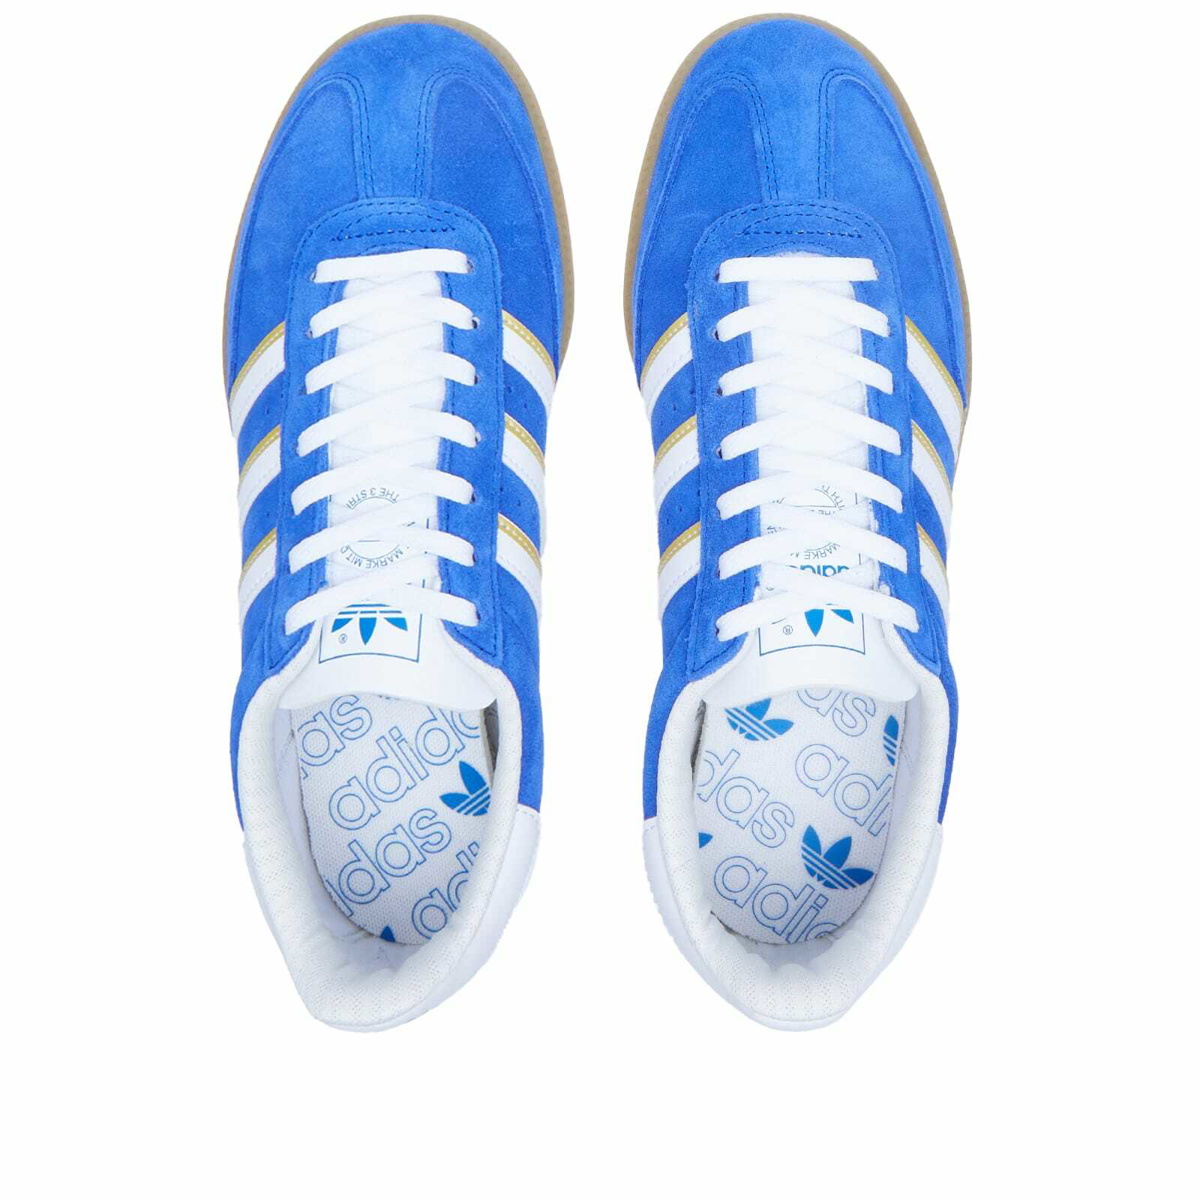 Sneakers 2 adidas Blue/White Lucid Semi Adidas in Hand